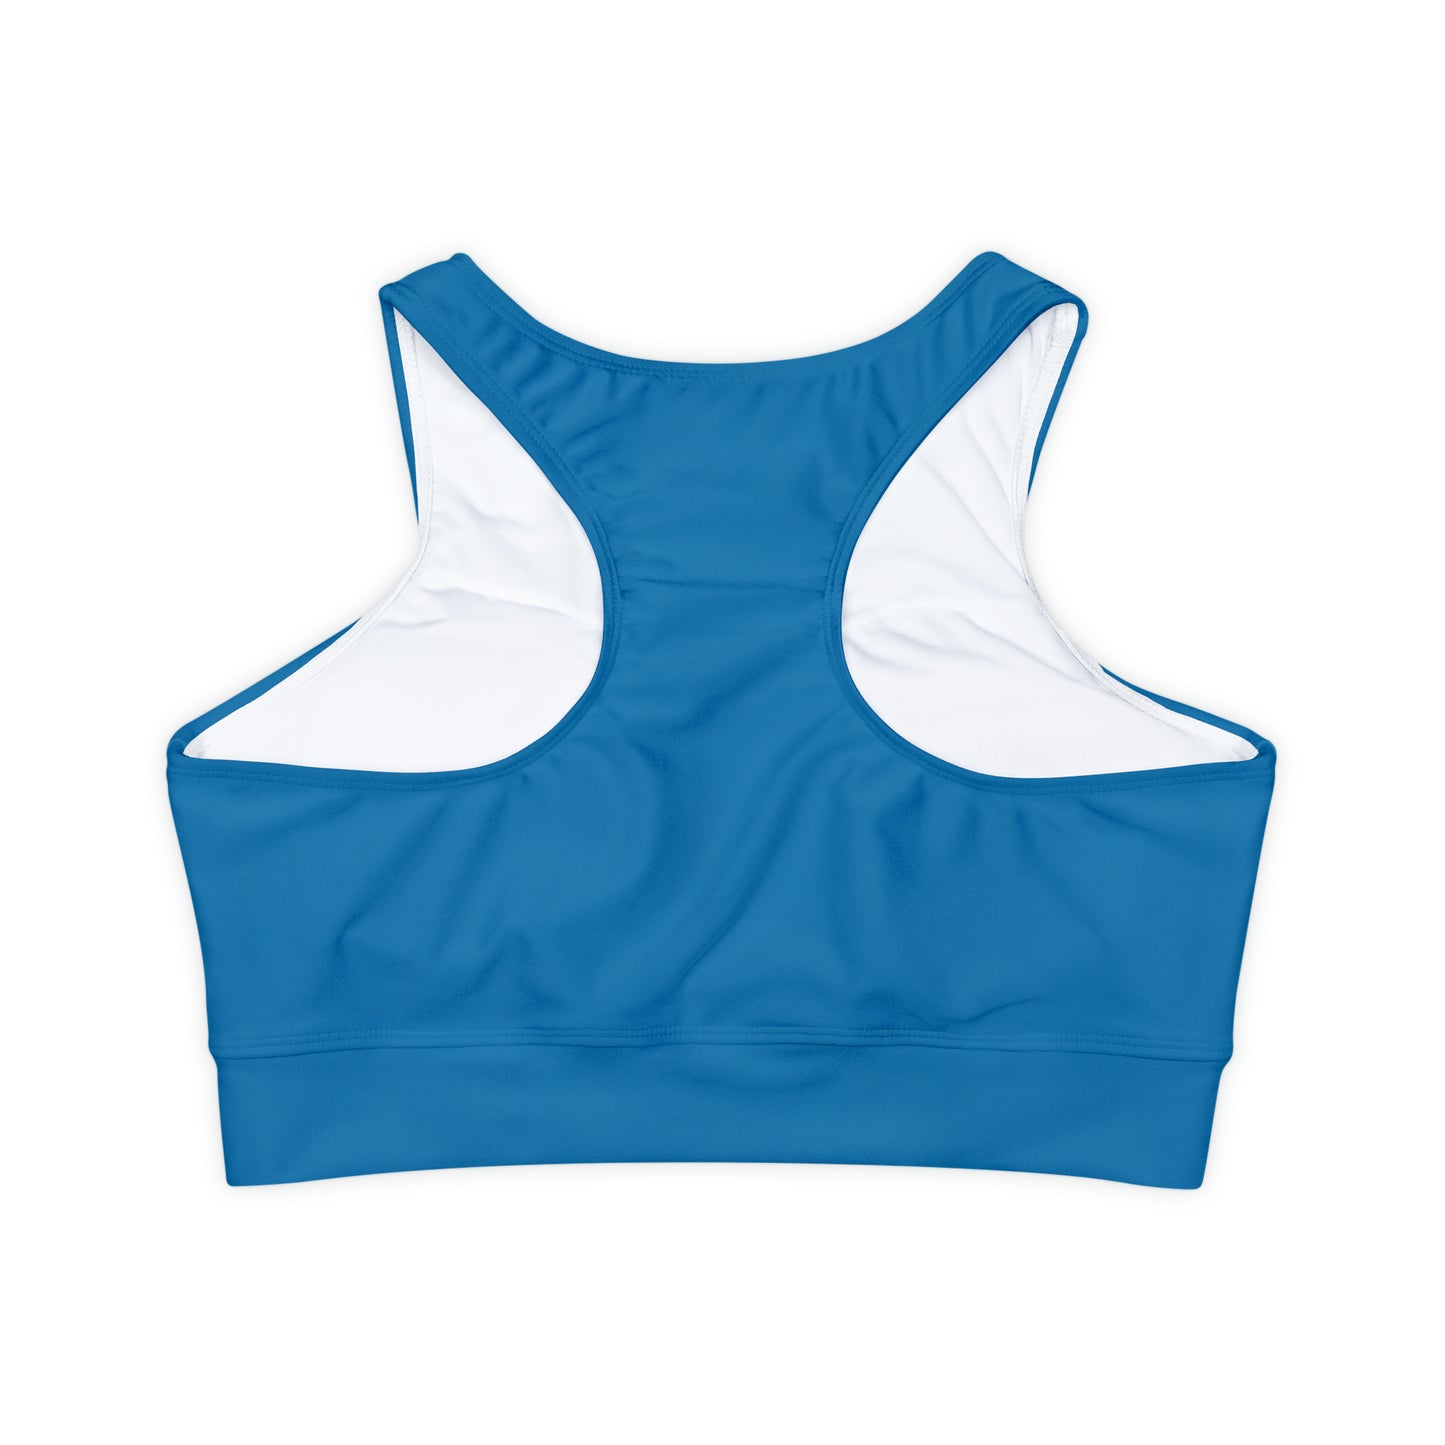 Solid Turquoise Fully Lined, Padded Sports Bra